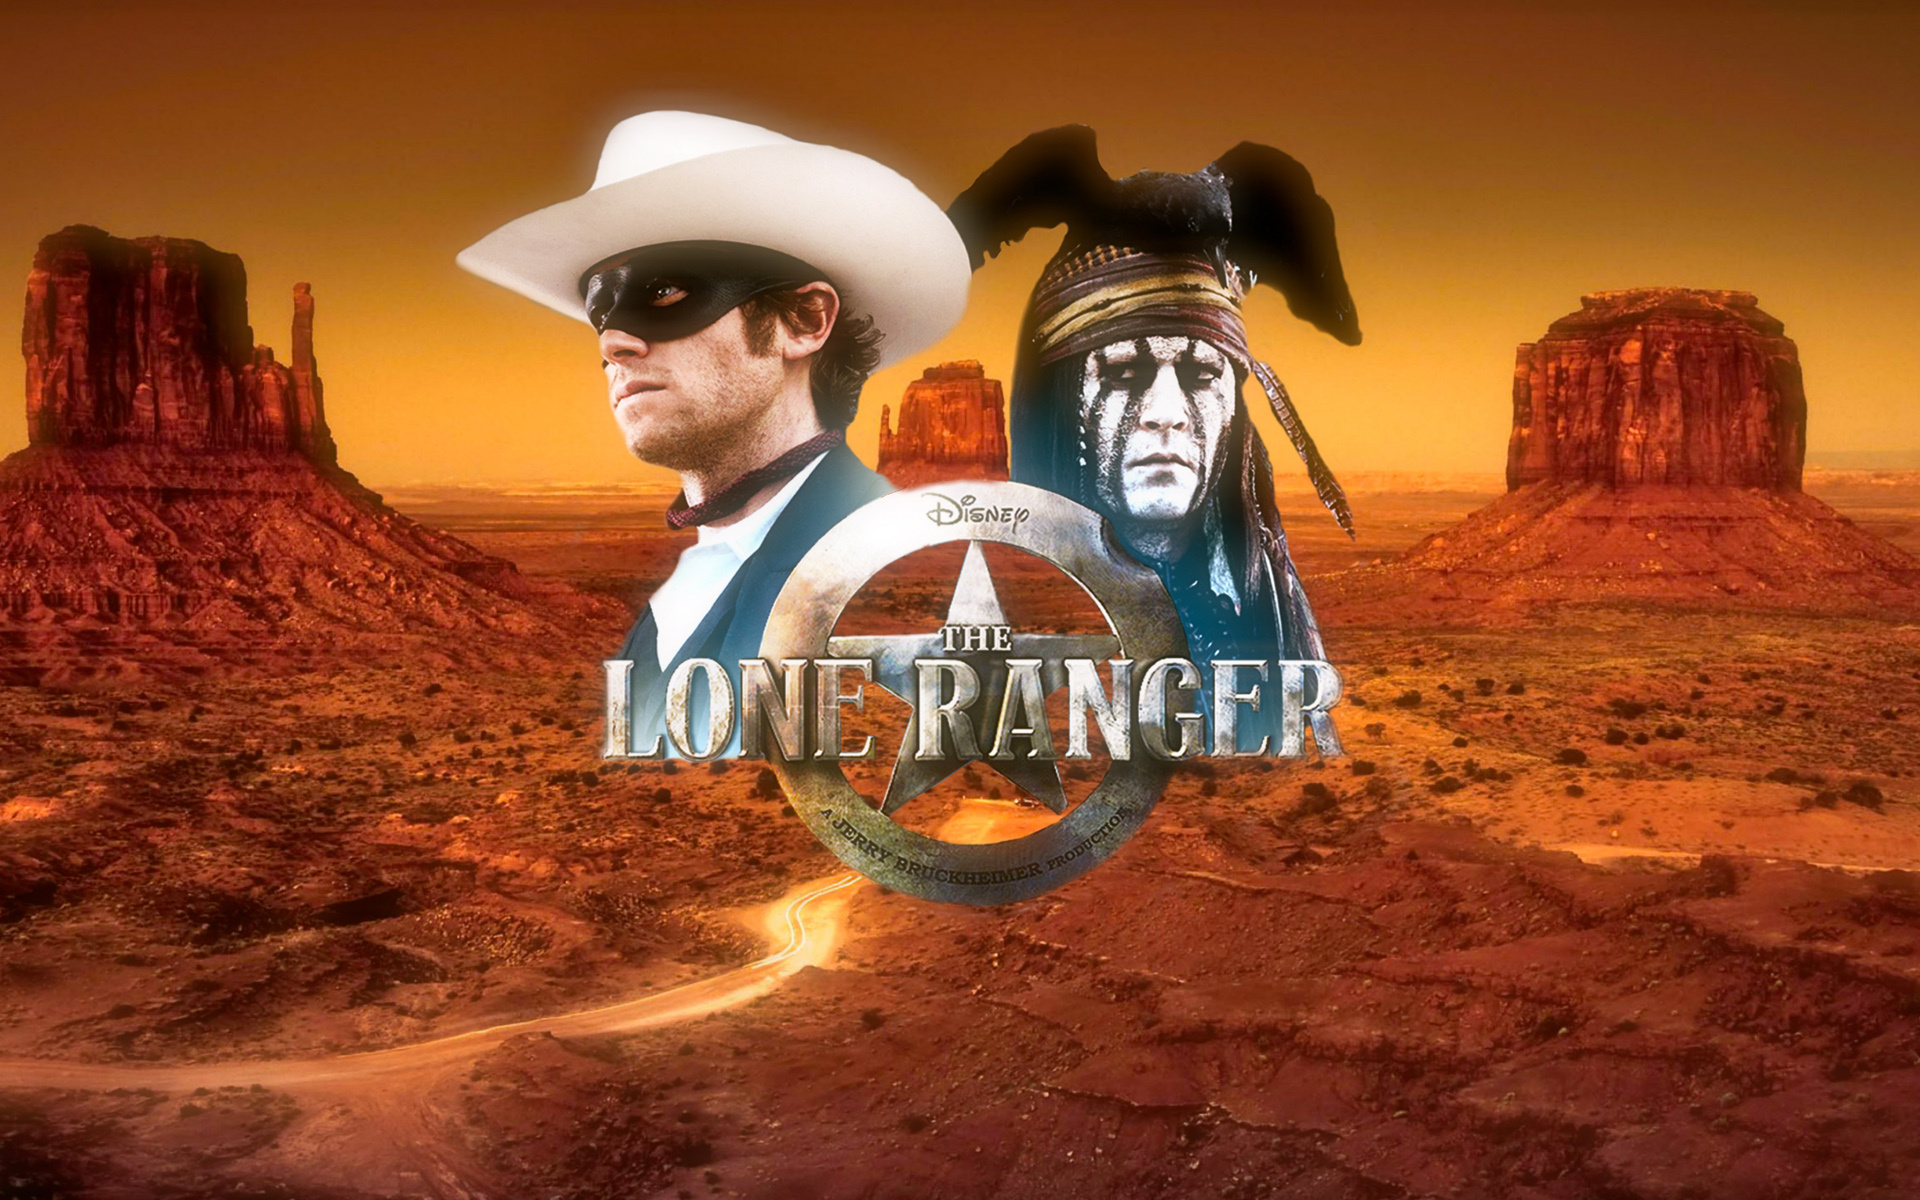 The Lone Ranger movie, Extensive Lone Ranger wallpaper collection, High-quality images, Cowboy theme, 1920x1200 HD Desktop